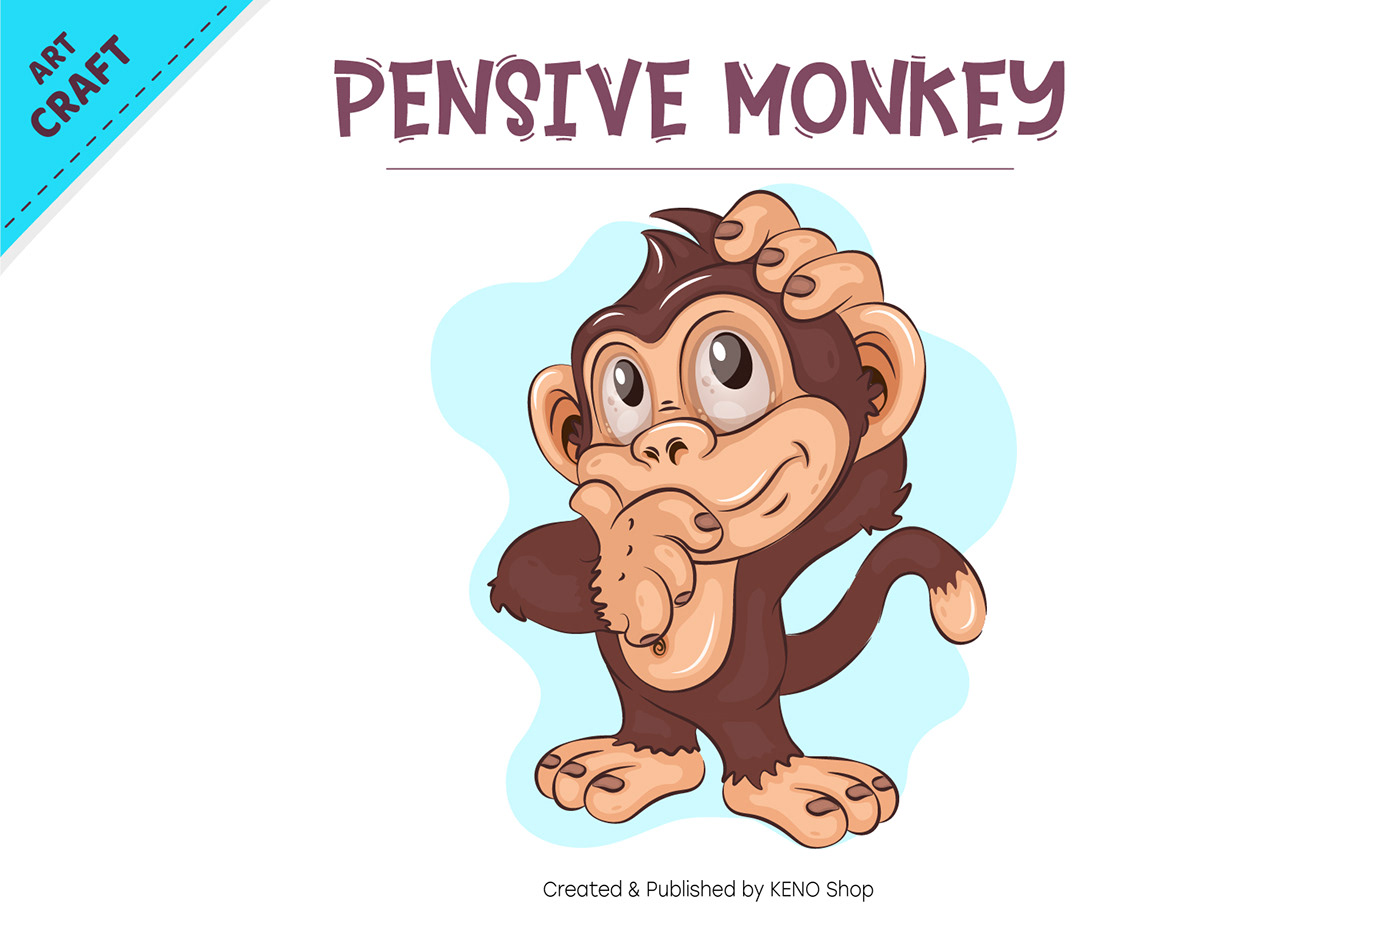 A cute illustration of a thinking cartoon monkey scratching its head thoughtfully.